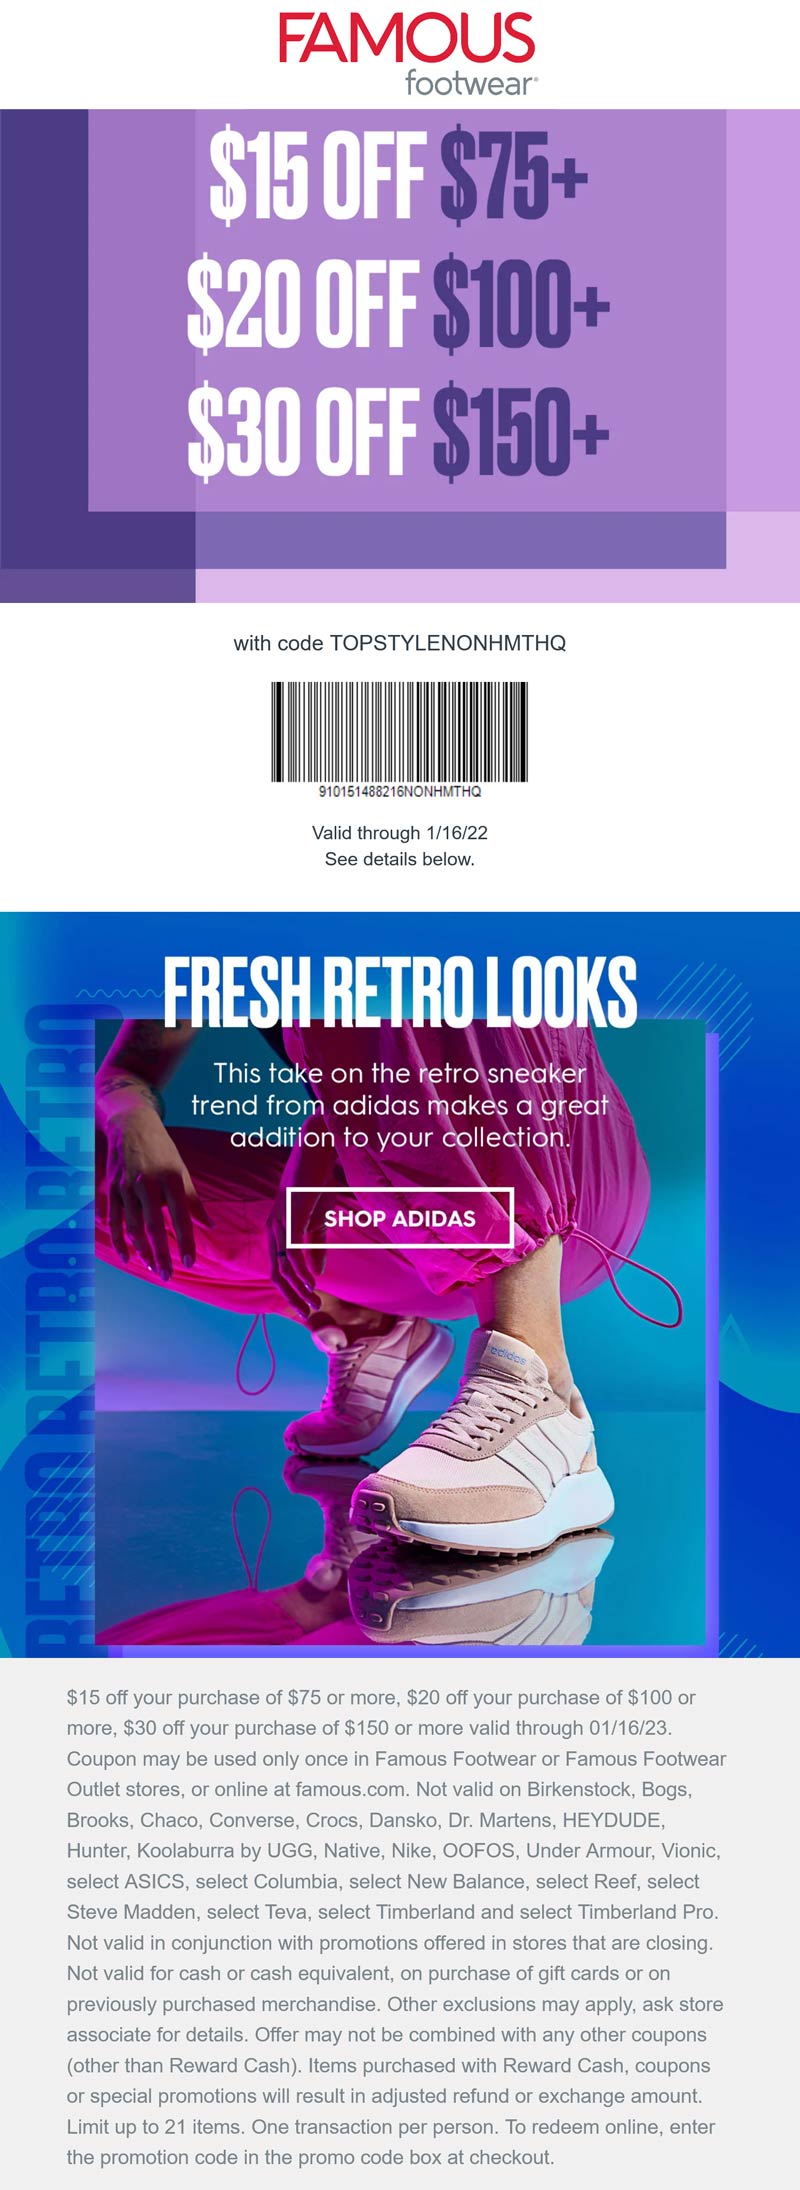 Famous Footwear coupons & promo code for [February 2023]